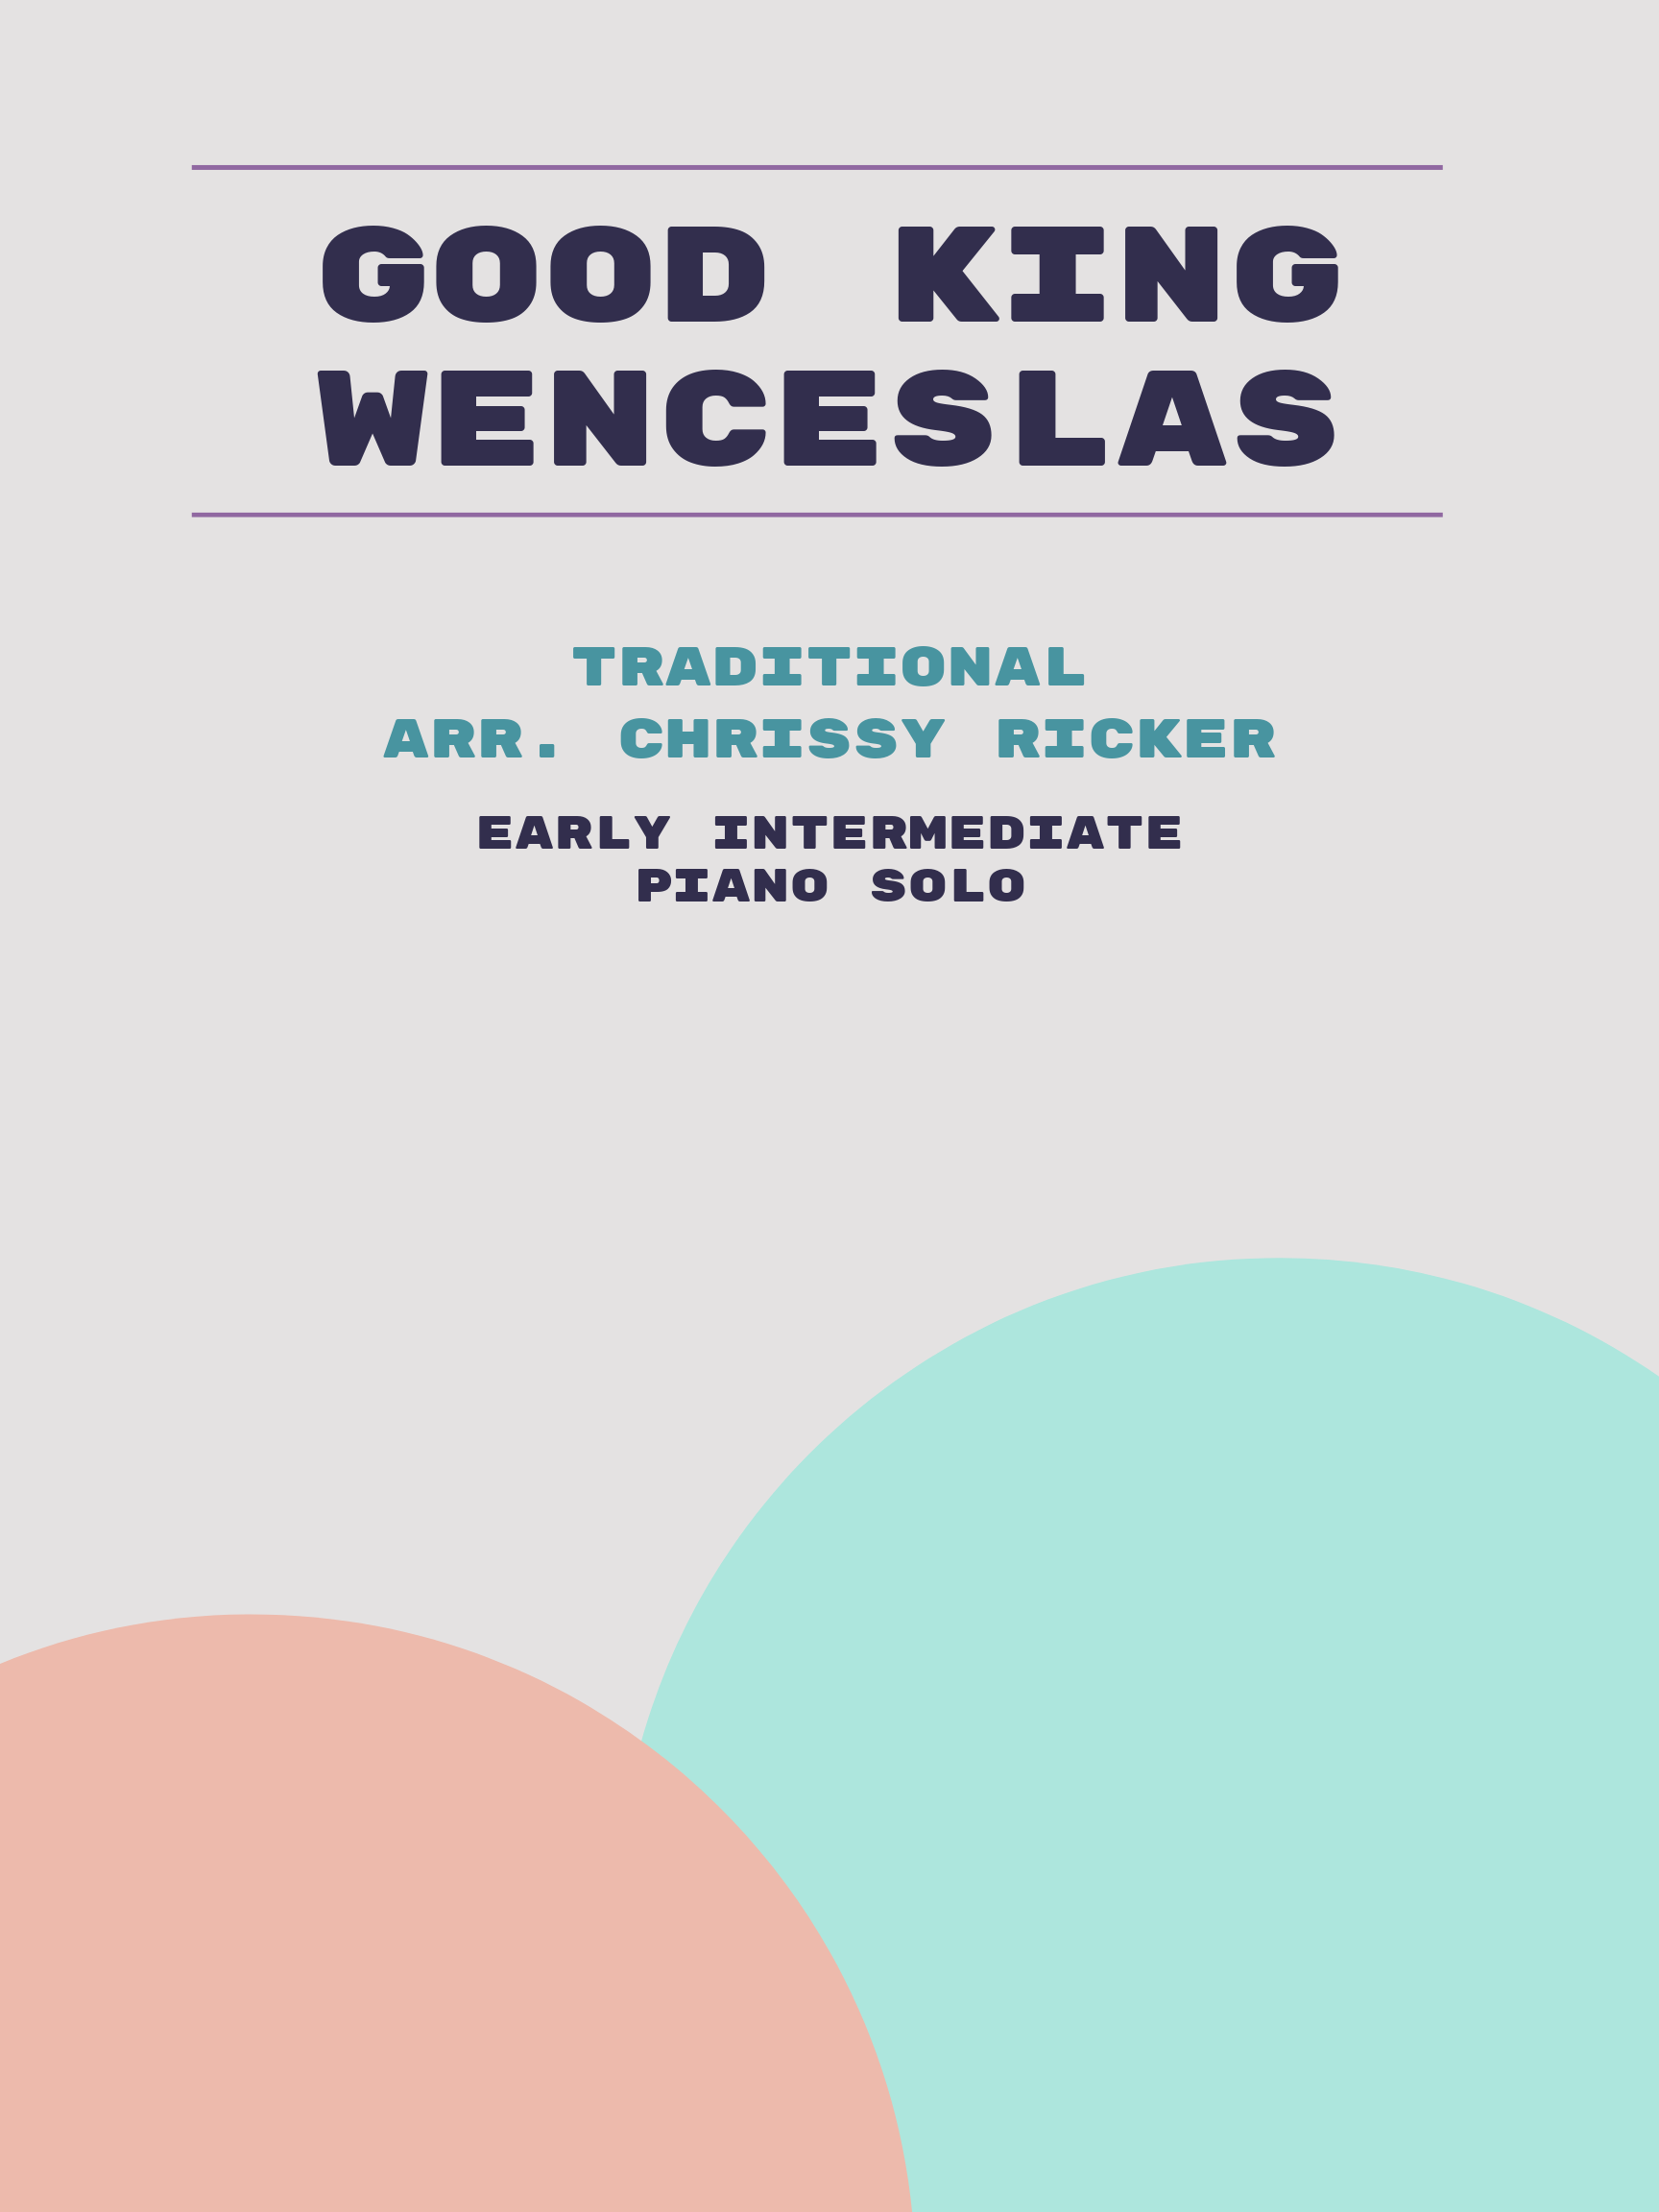 Good King Wenceslas by Traditional